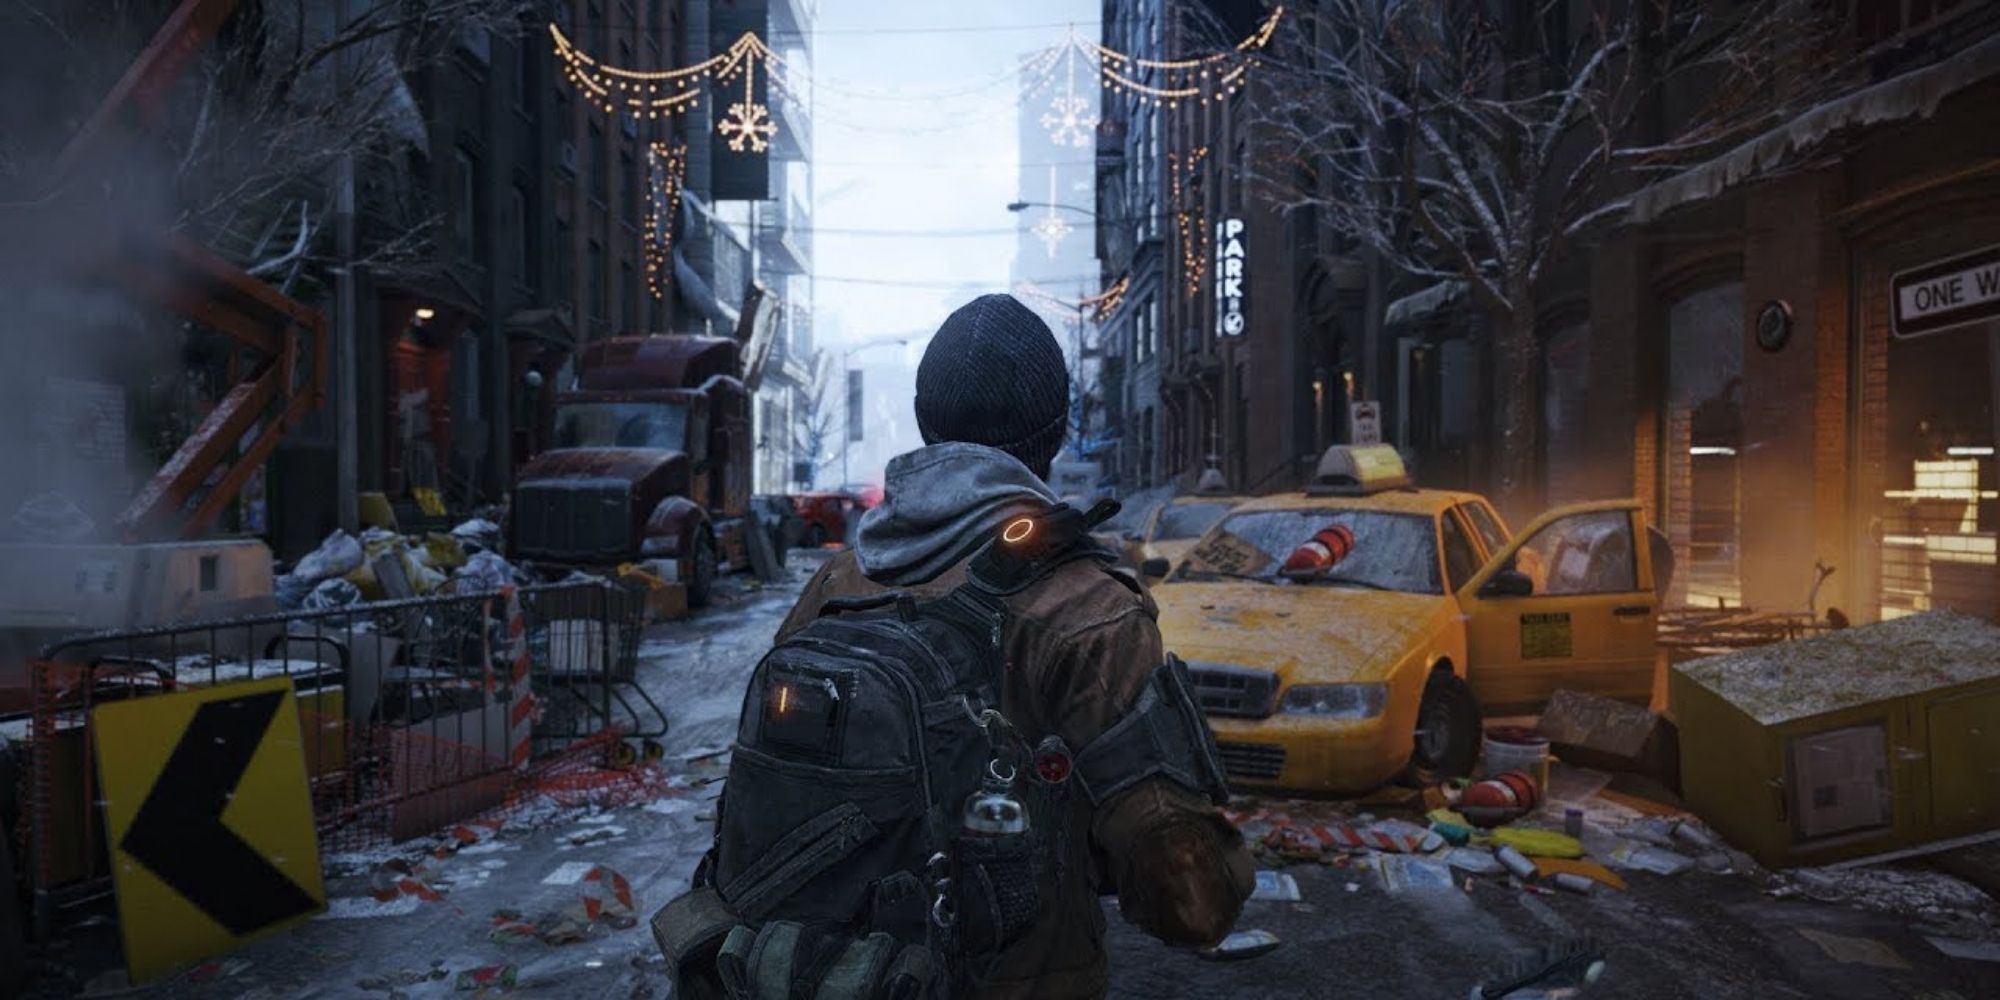 A Operative From The Division Stands In Front Of Some Christmas Lights